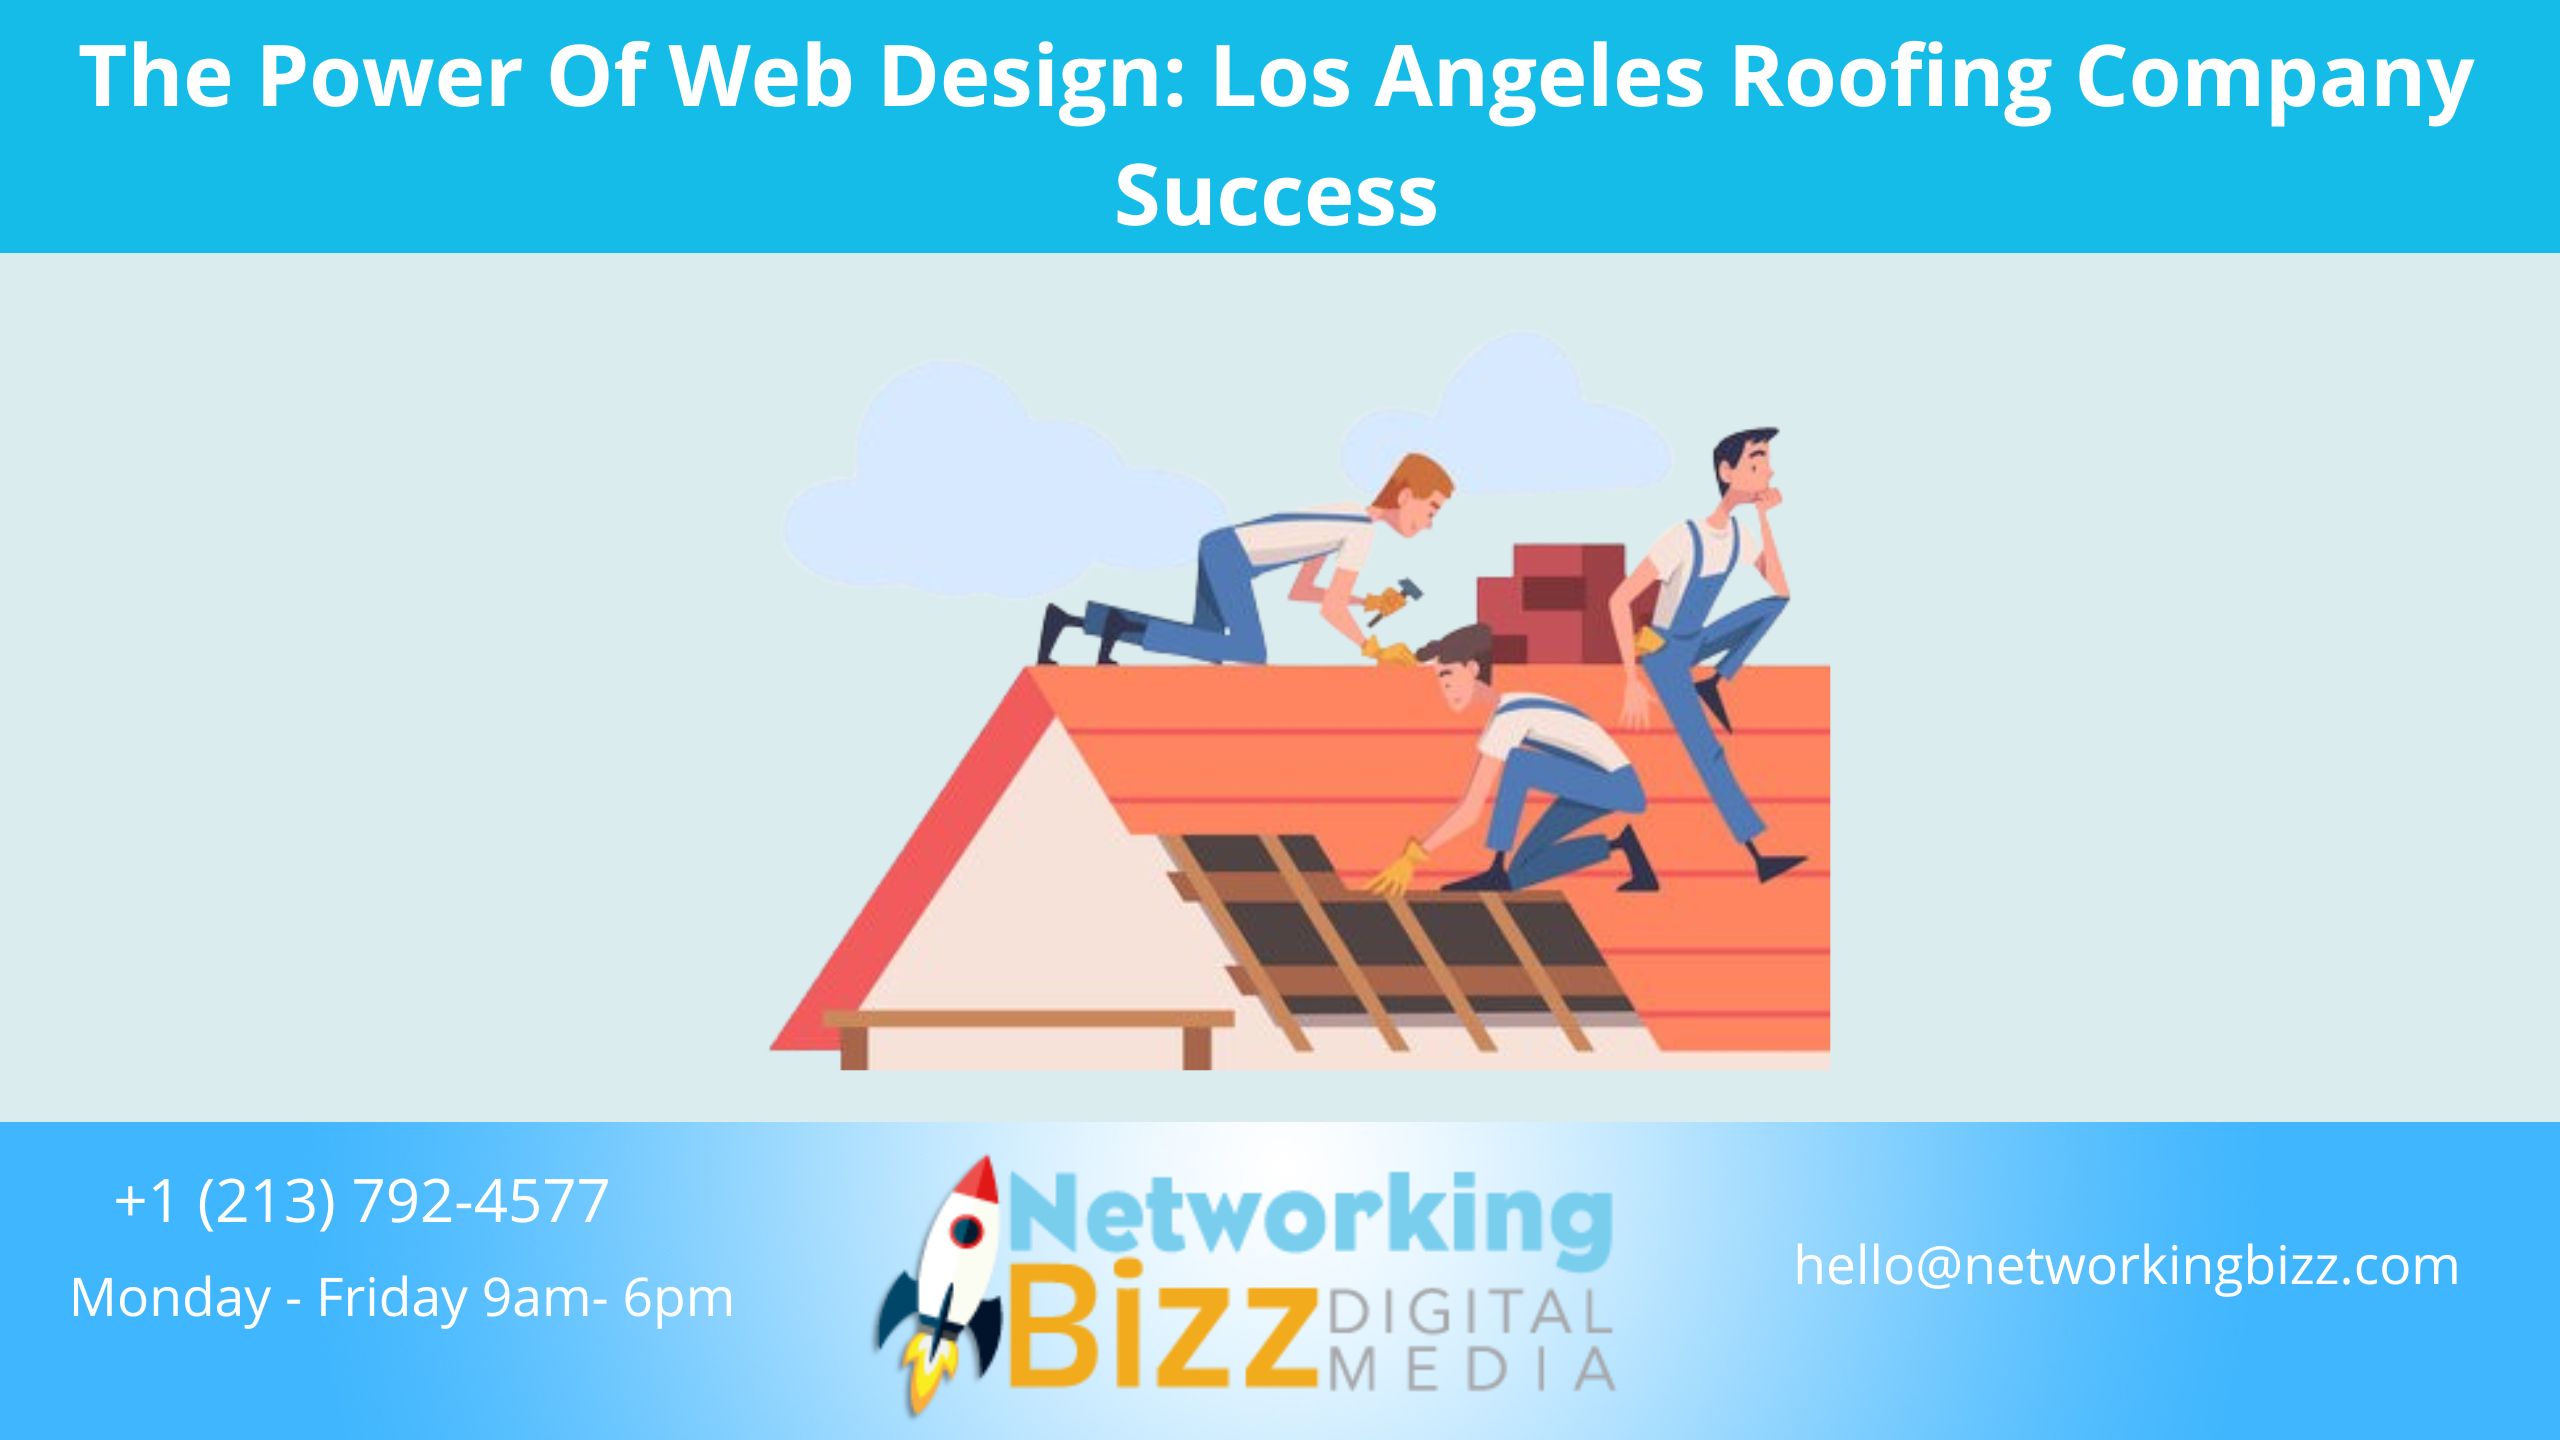 The Power Of Web Design: Los Angeles Roofing Company Success